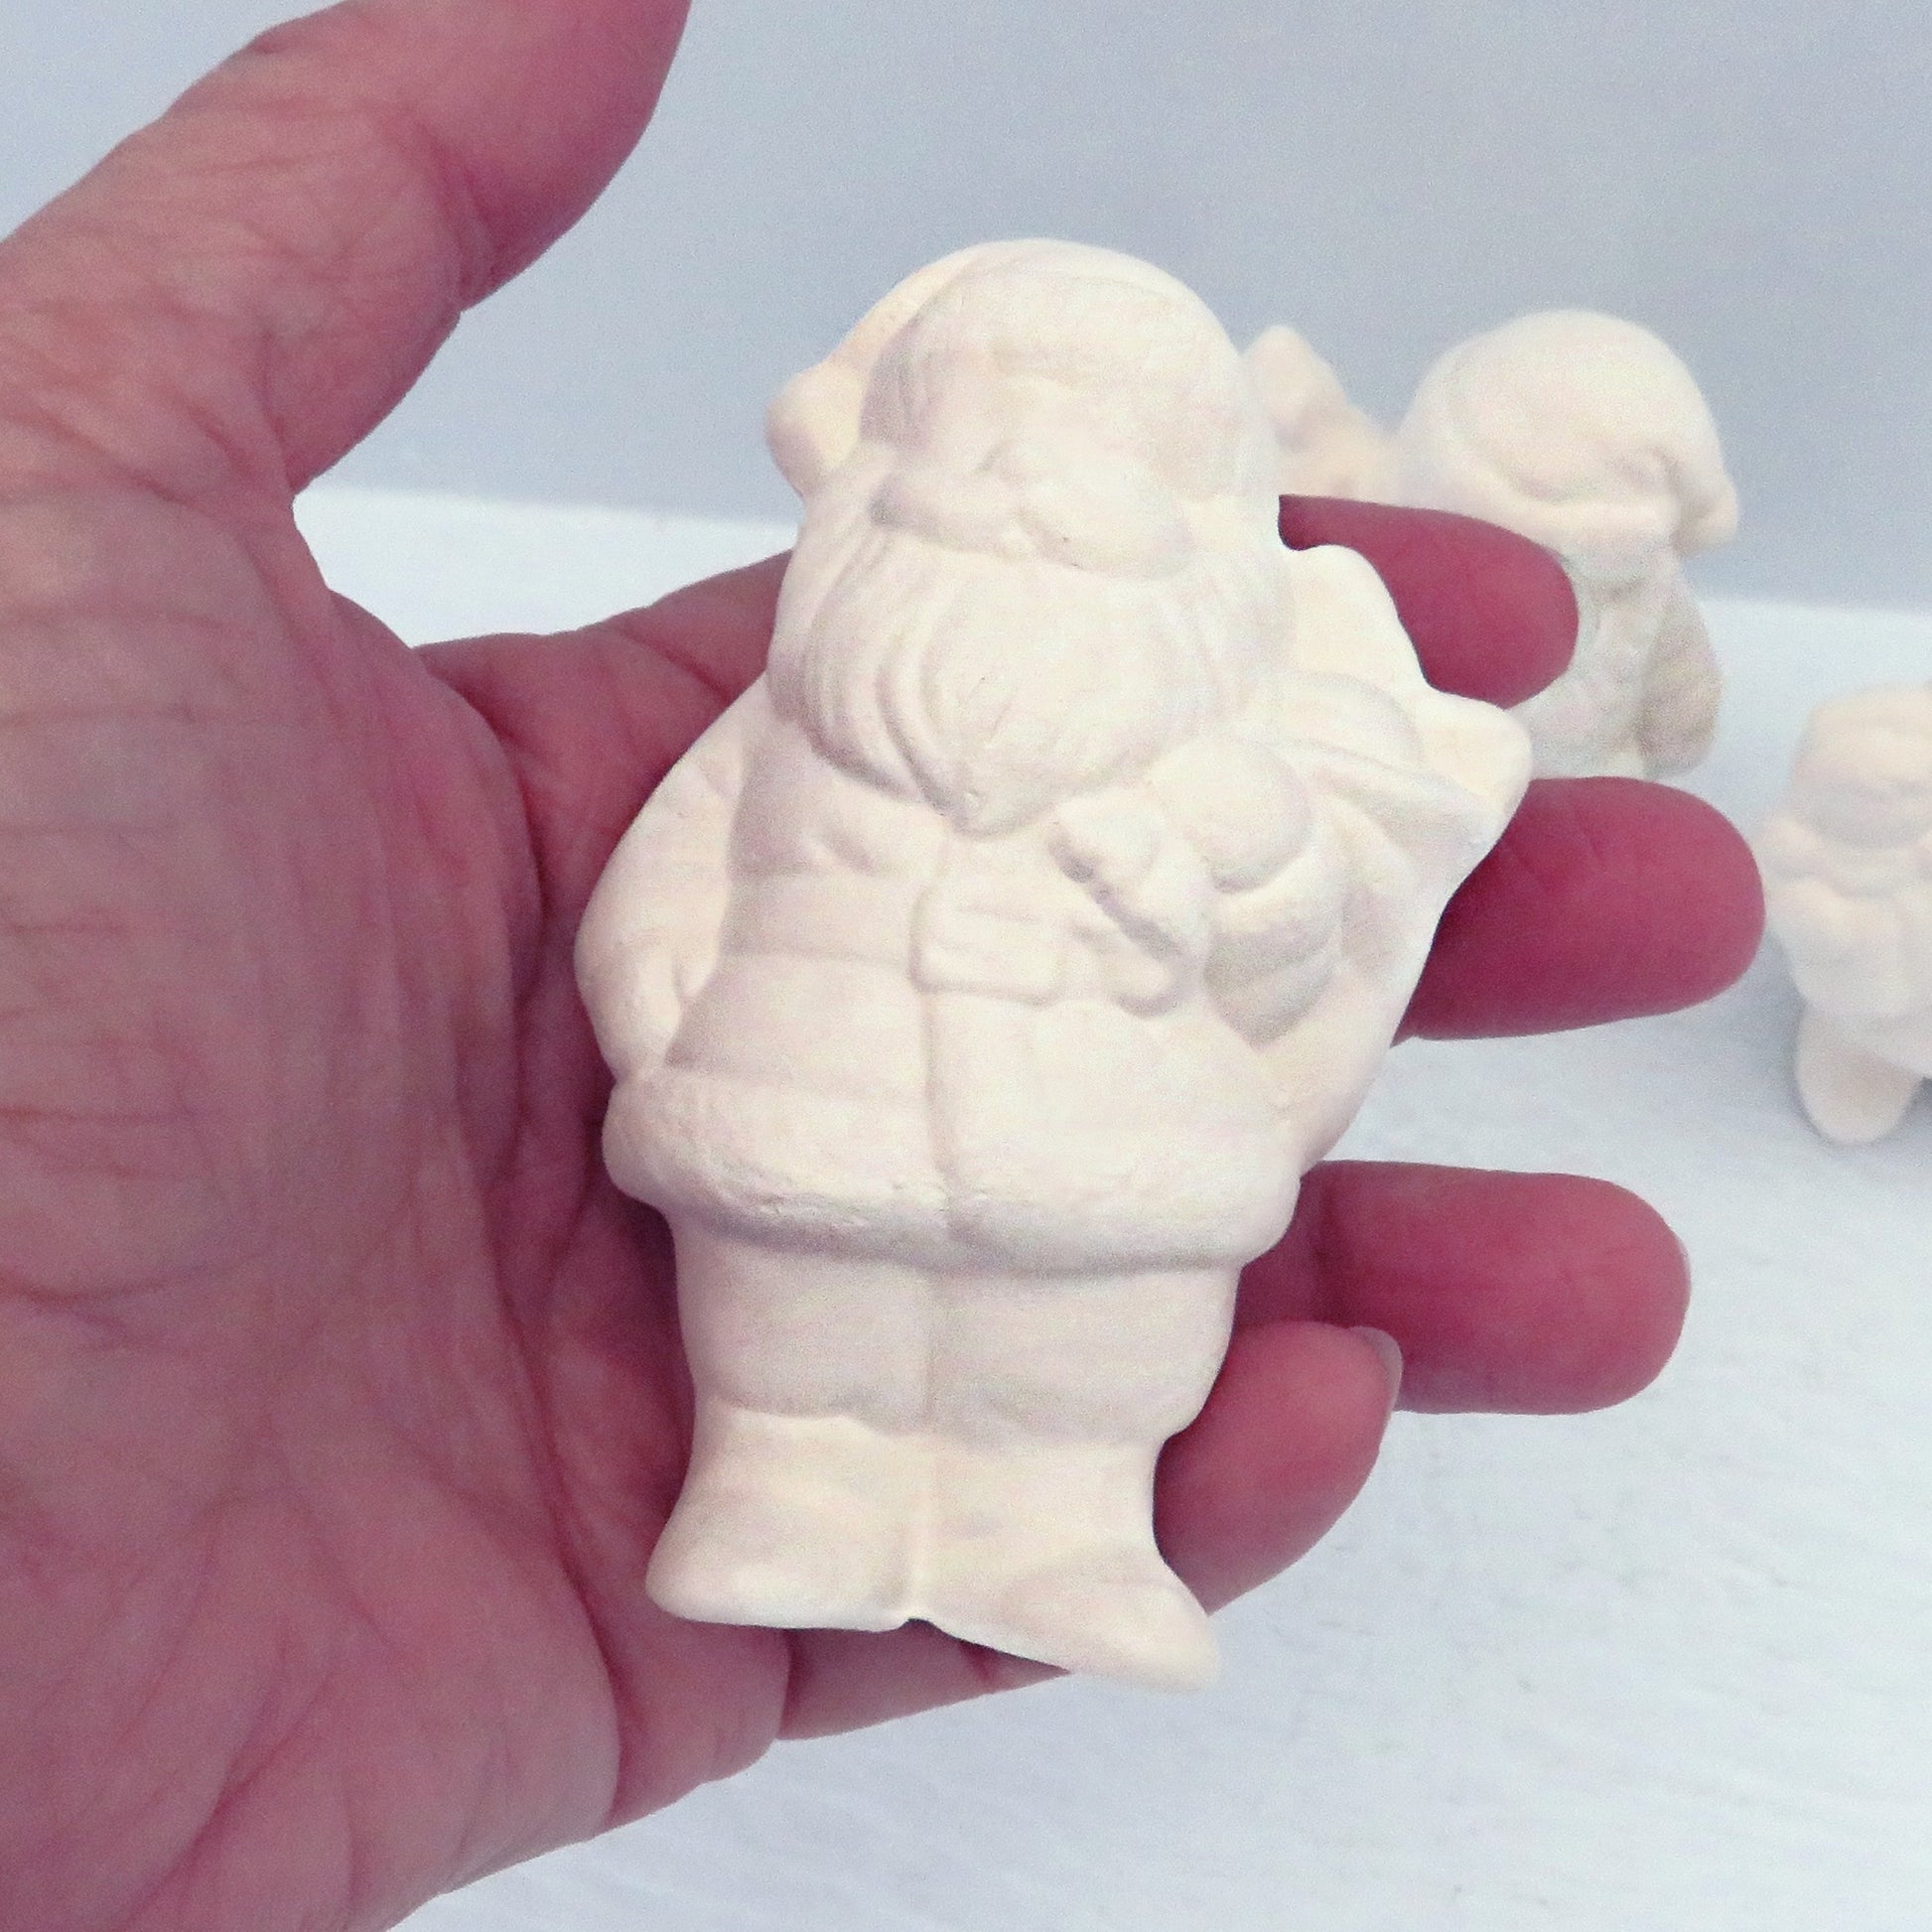 Handmade paint it yourself ceramic santa in my hand for size comparison.